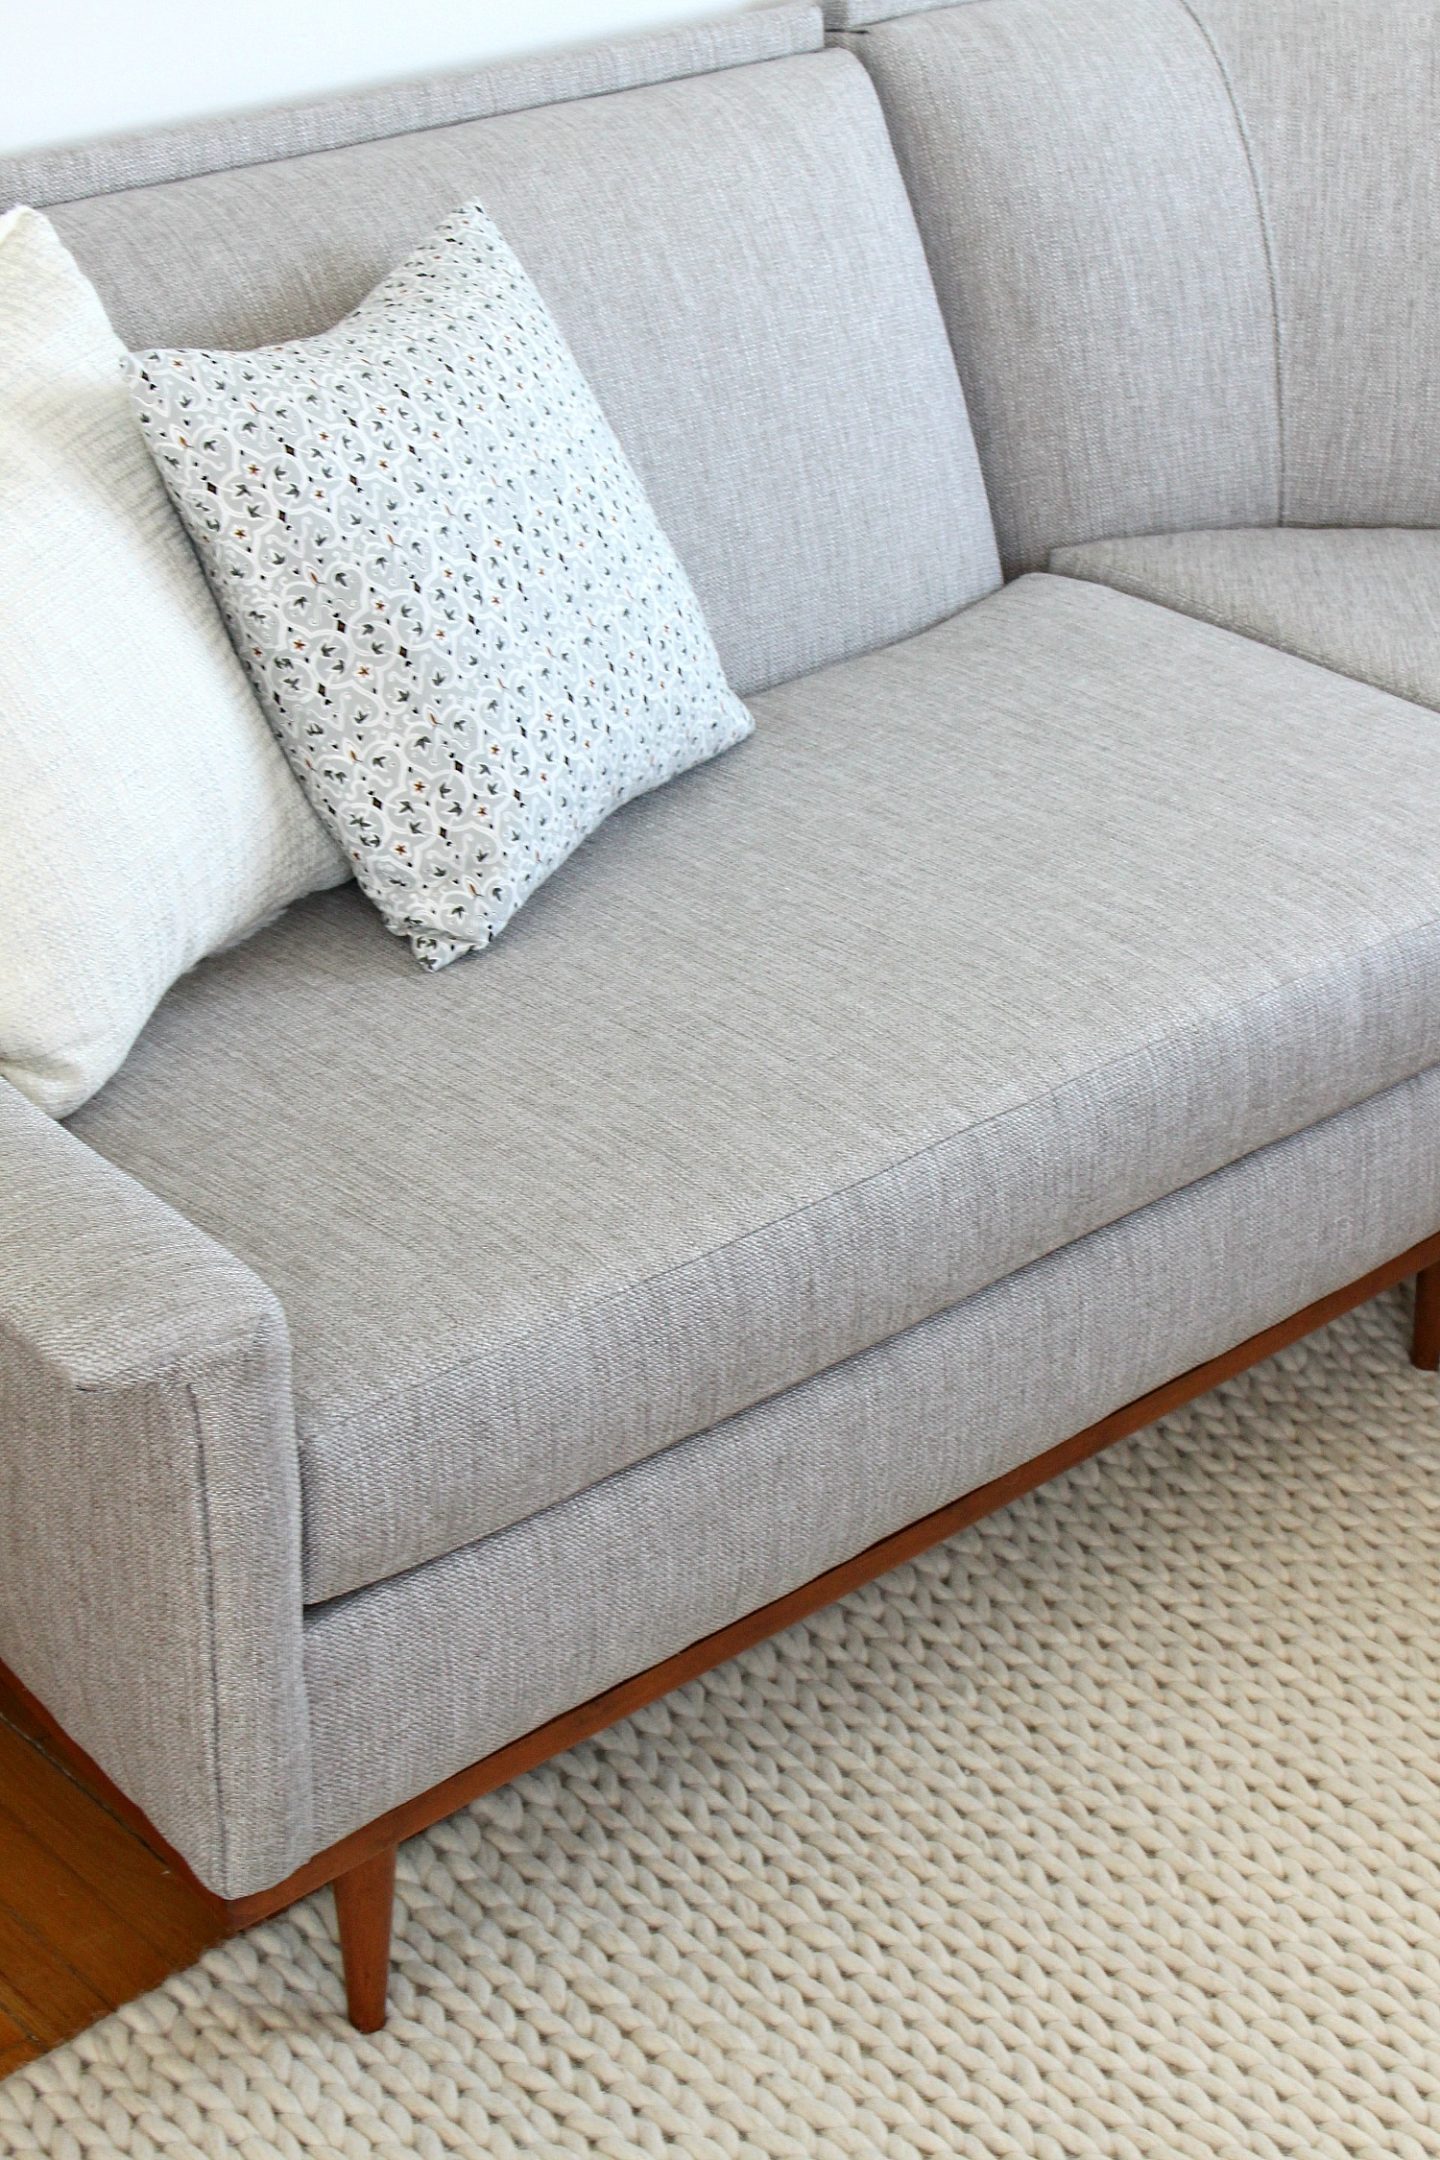 Mid-Century Modern Sectional Sofa Makeover | Before and After